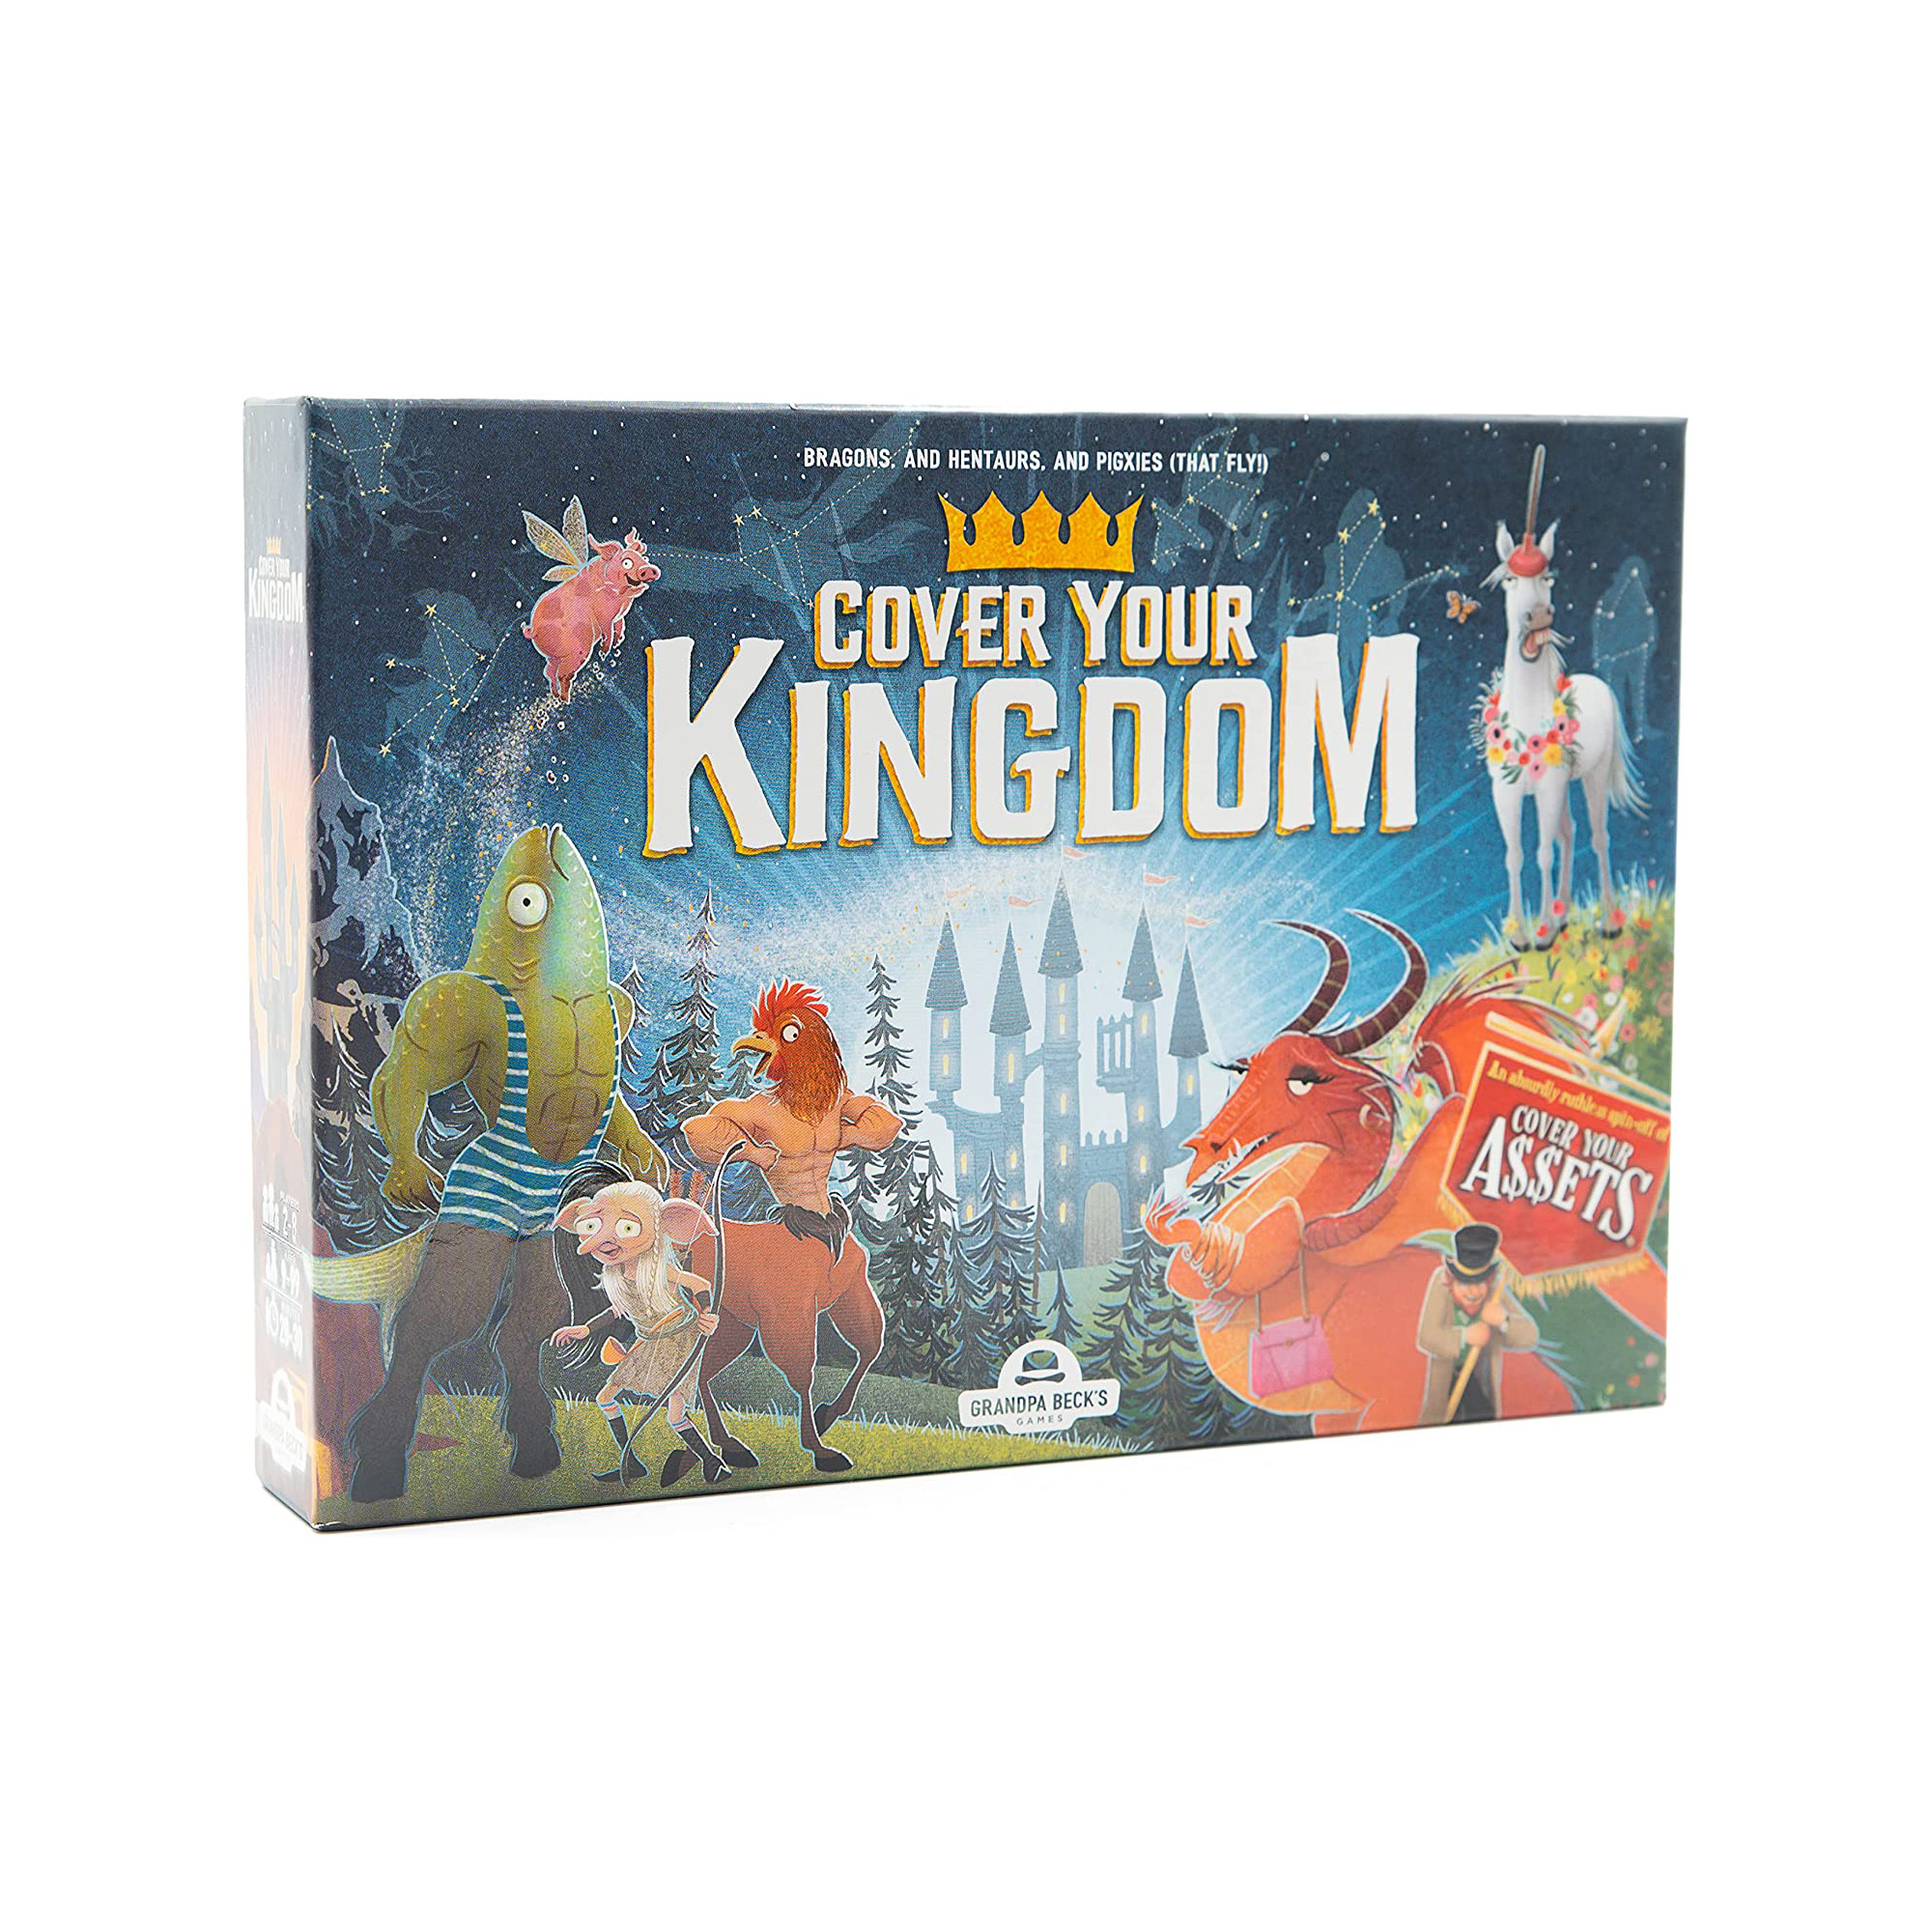 Cover Your Kingdom Board Game, by Grandpa Beck's Games - image 1 of 8